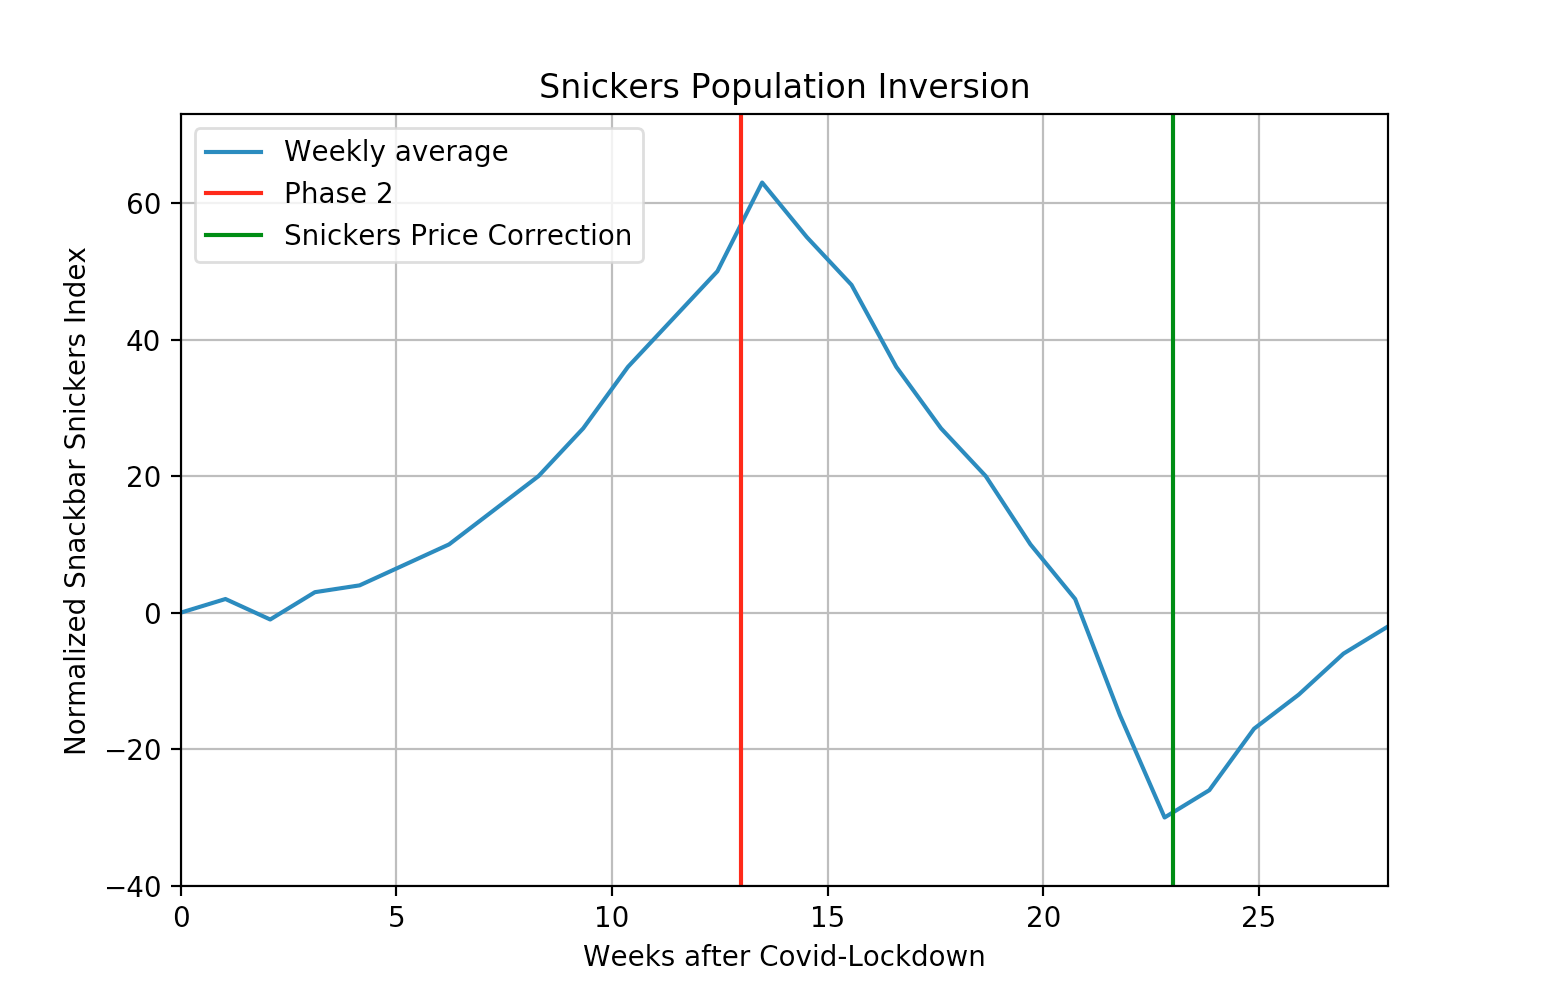 Figure 1: Snickers Population Inversion